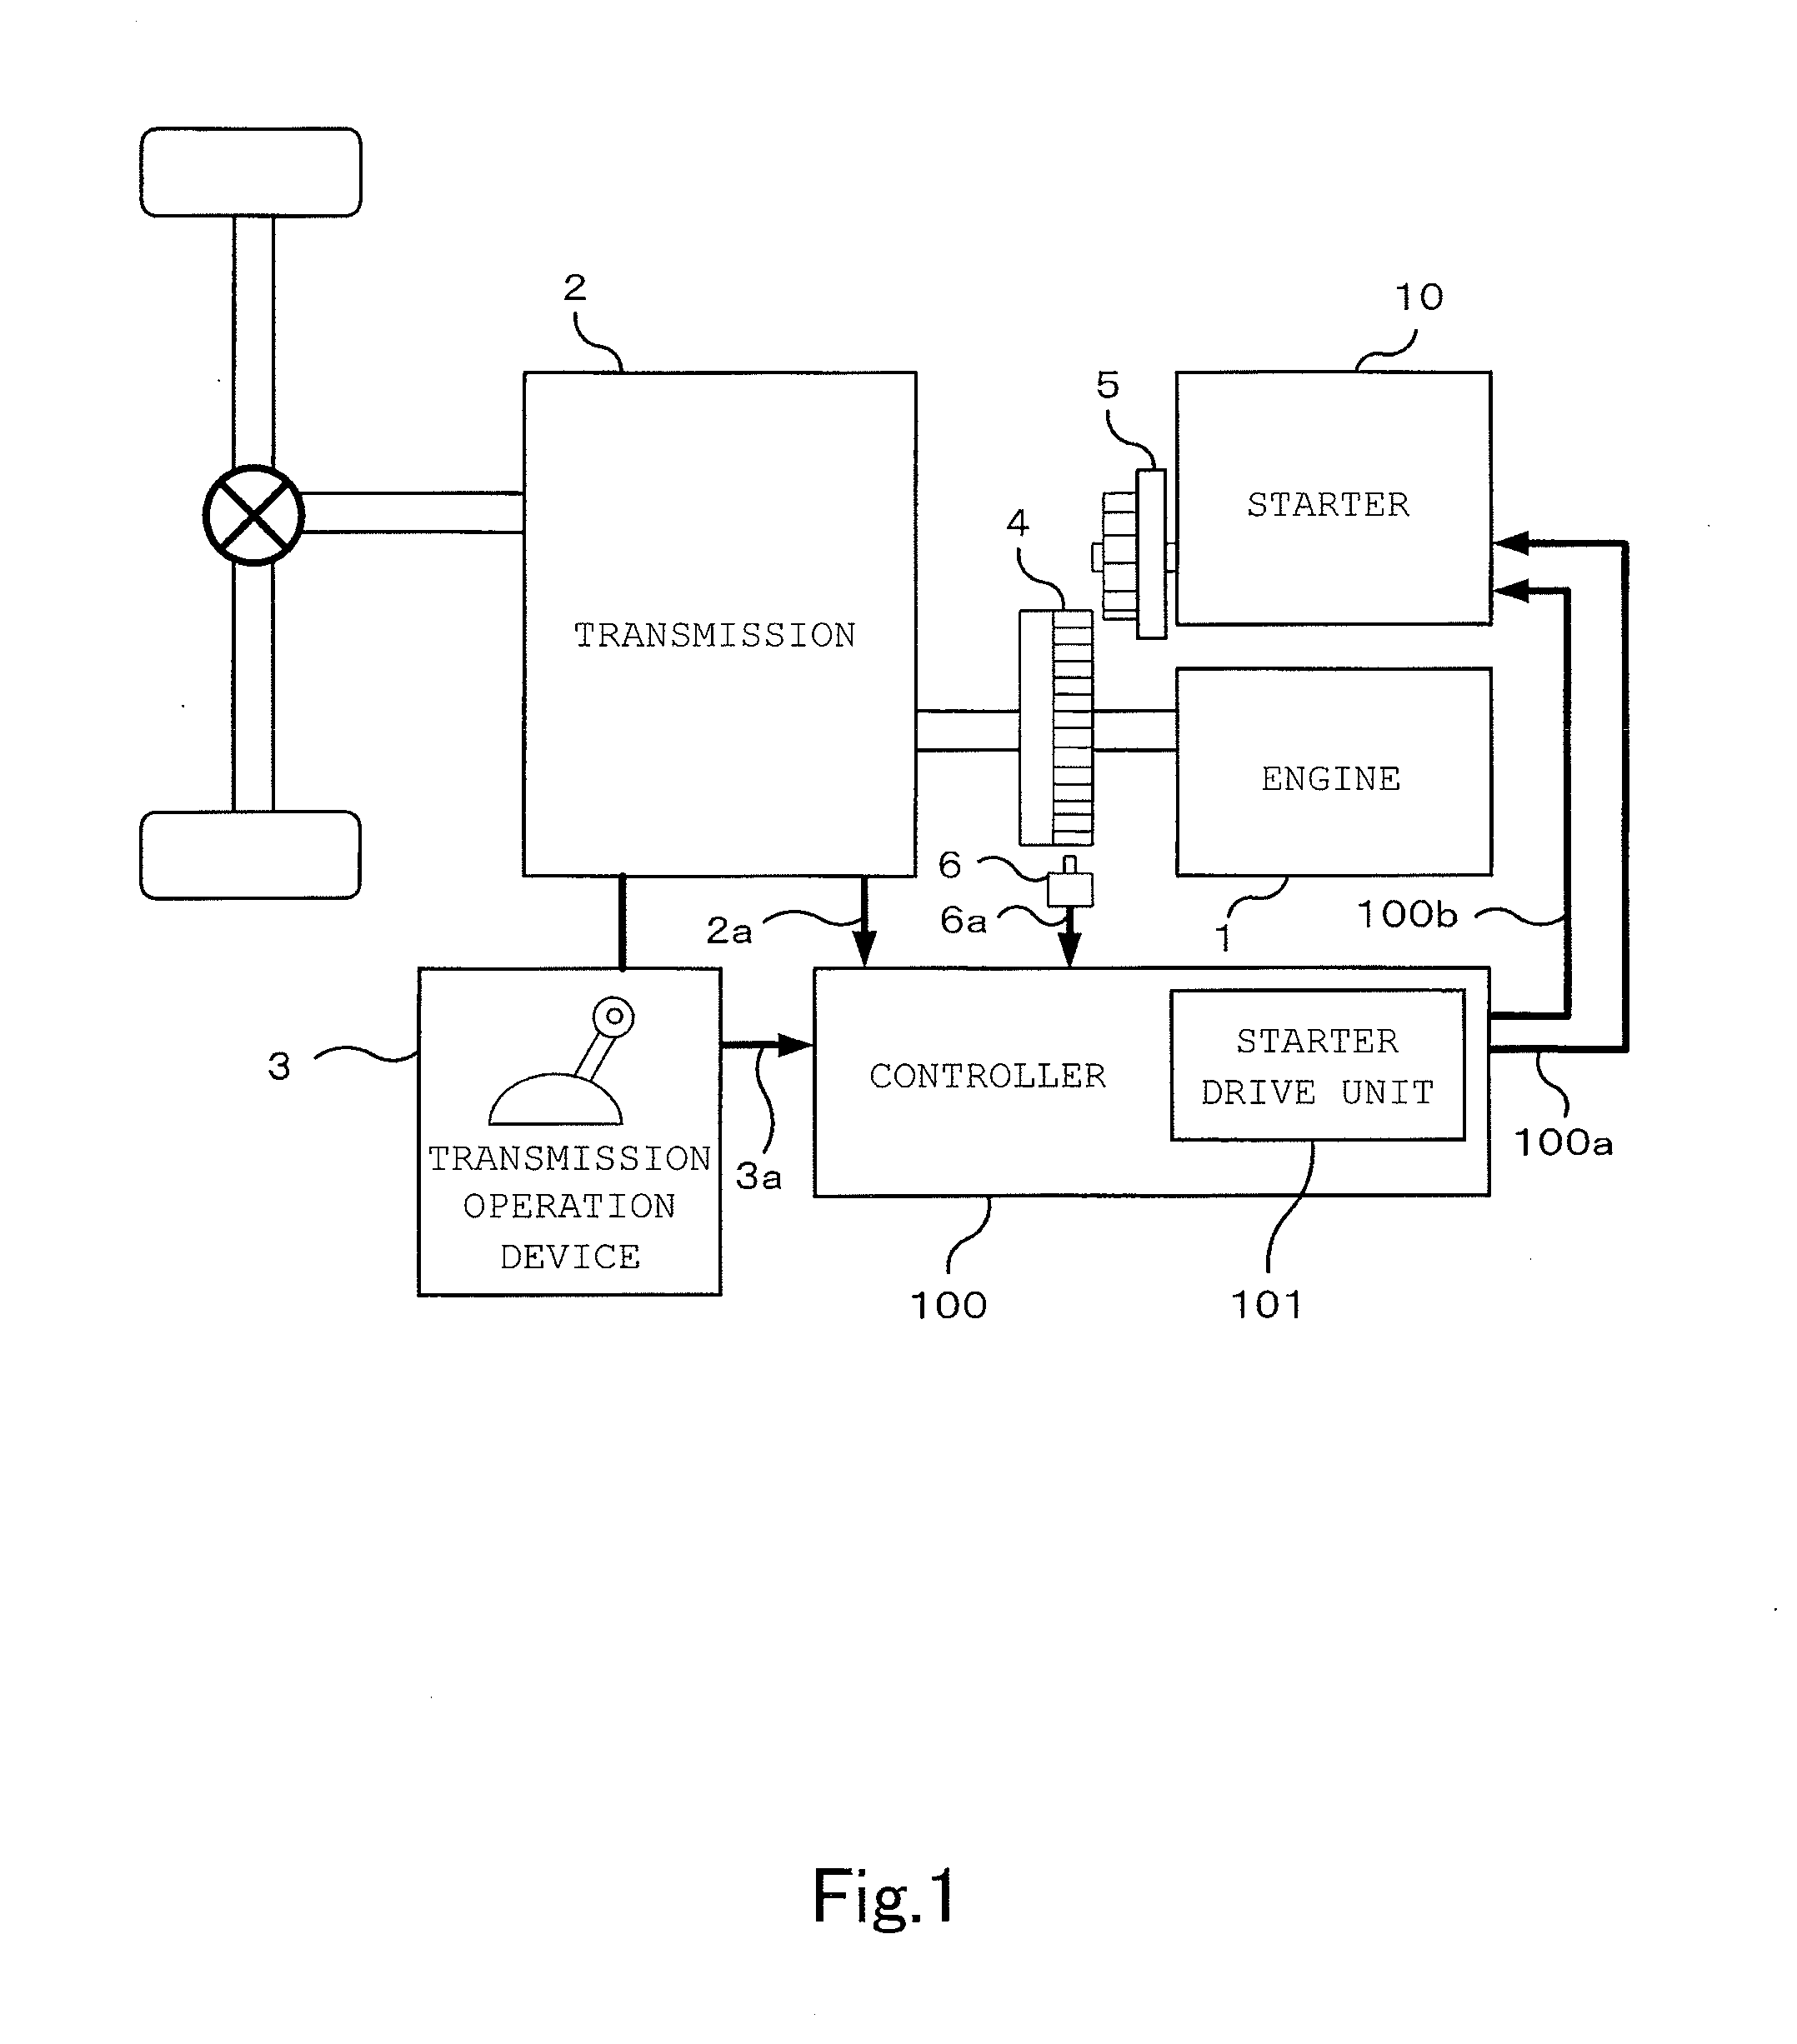 Automatic stop and restart device for an engine